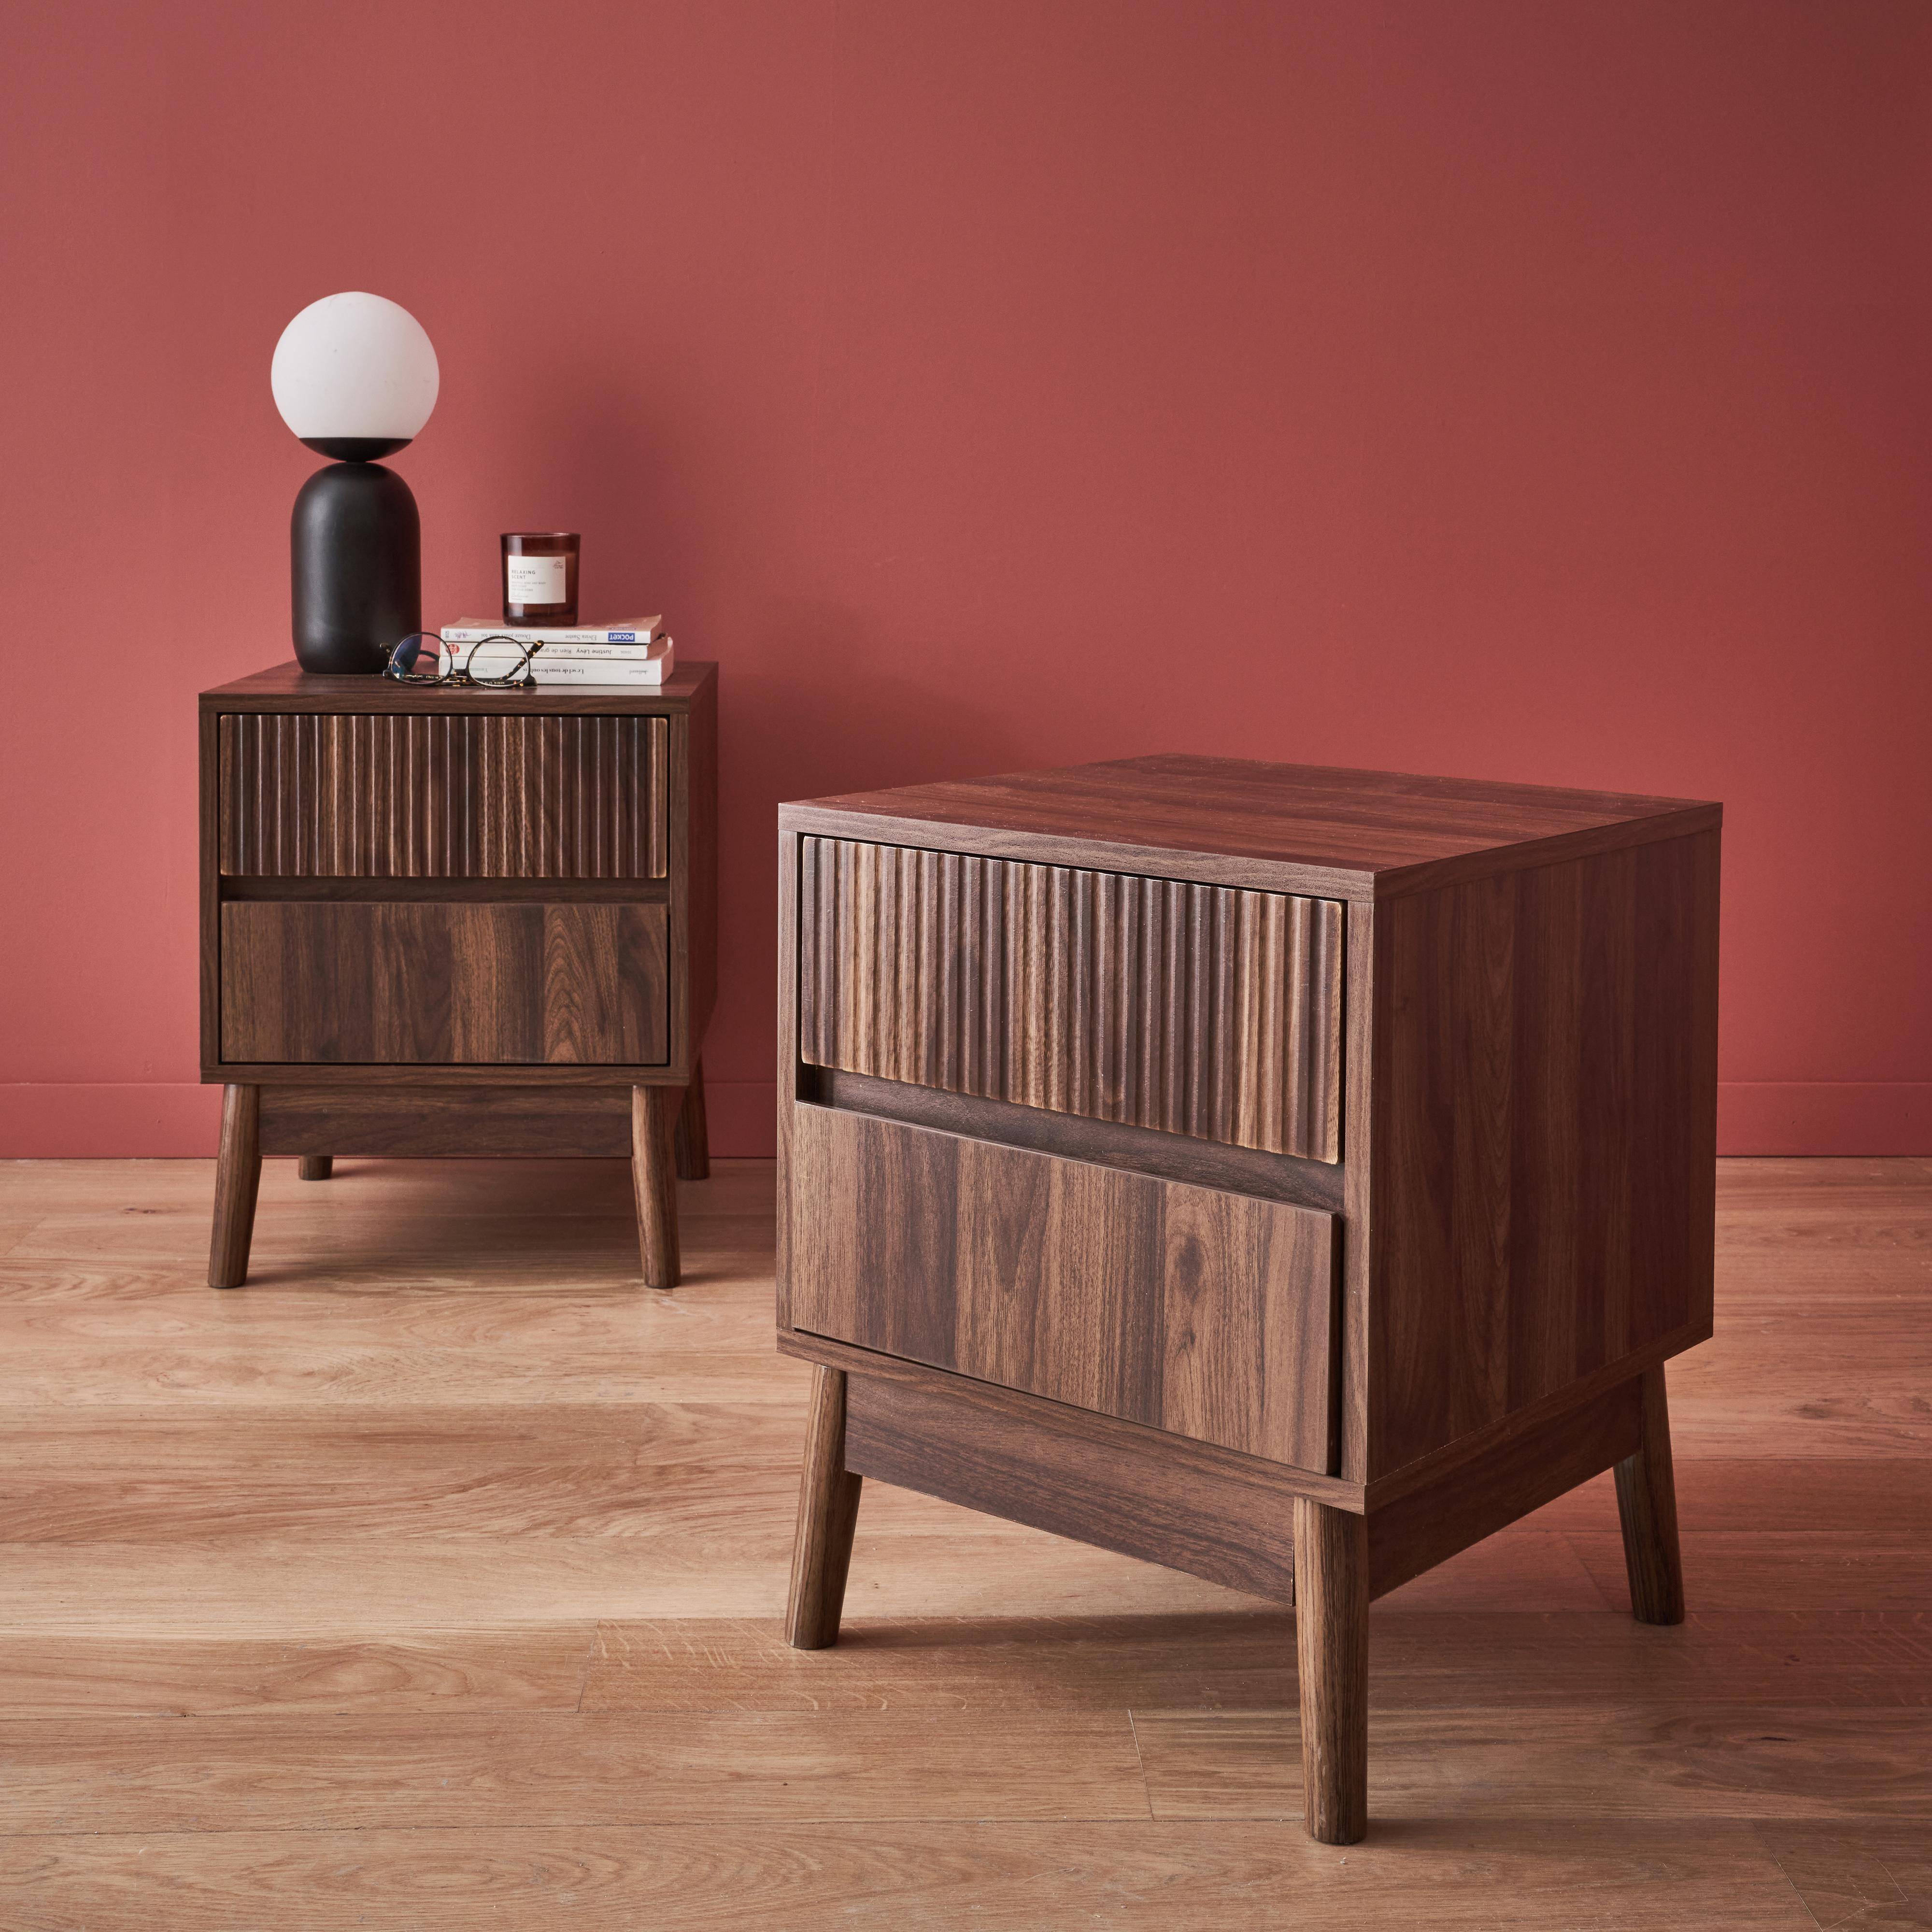 Pair of grooved wooden bedside tables with 2 drawers, 40x39x48cm - Linear - Dark Wood colour Photo1